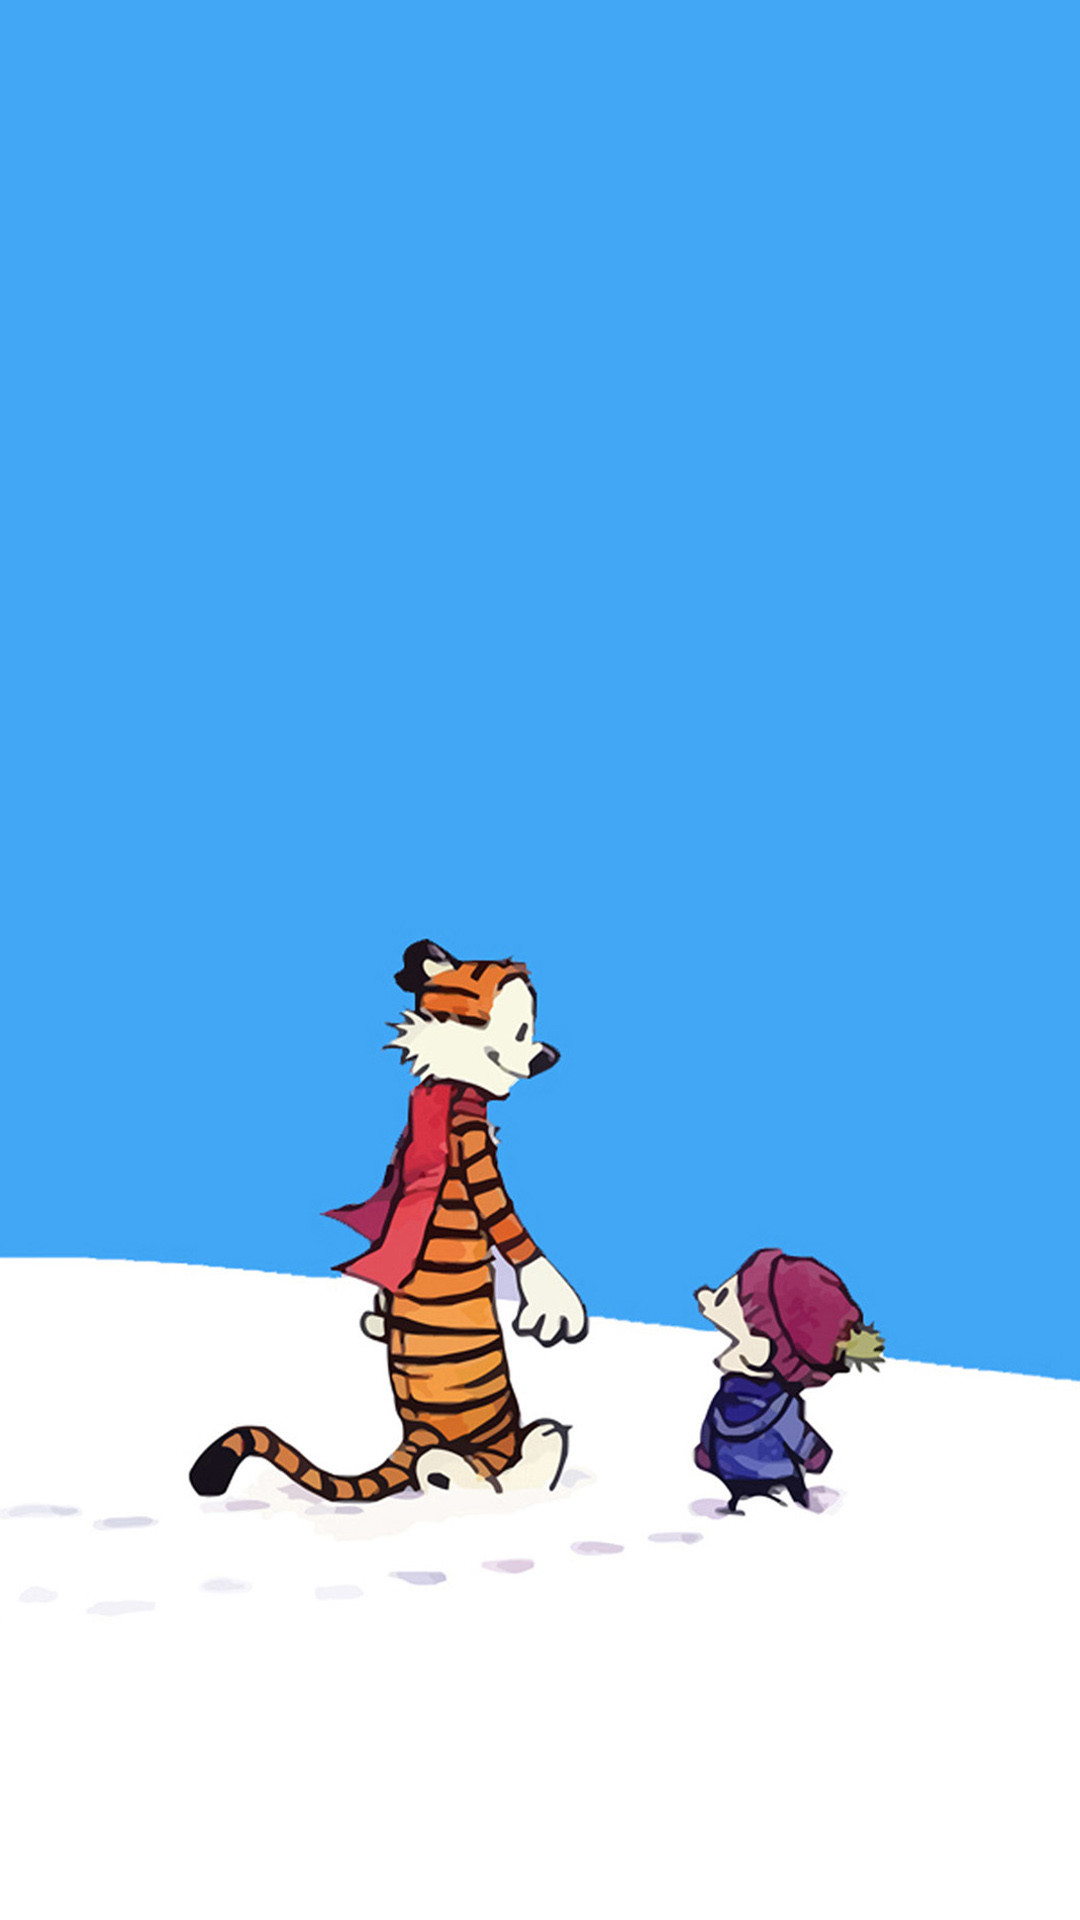 1080x1920 Calvin And Hobbes Htc One M8 wallpaper